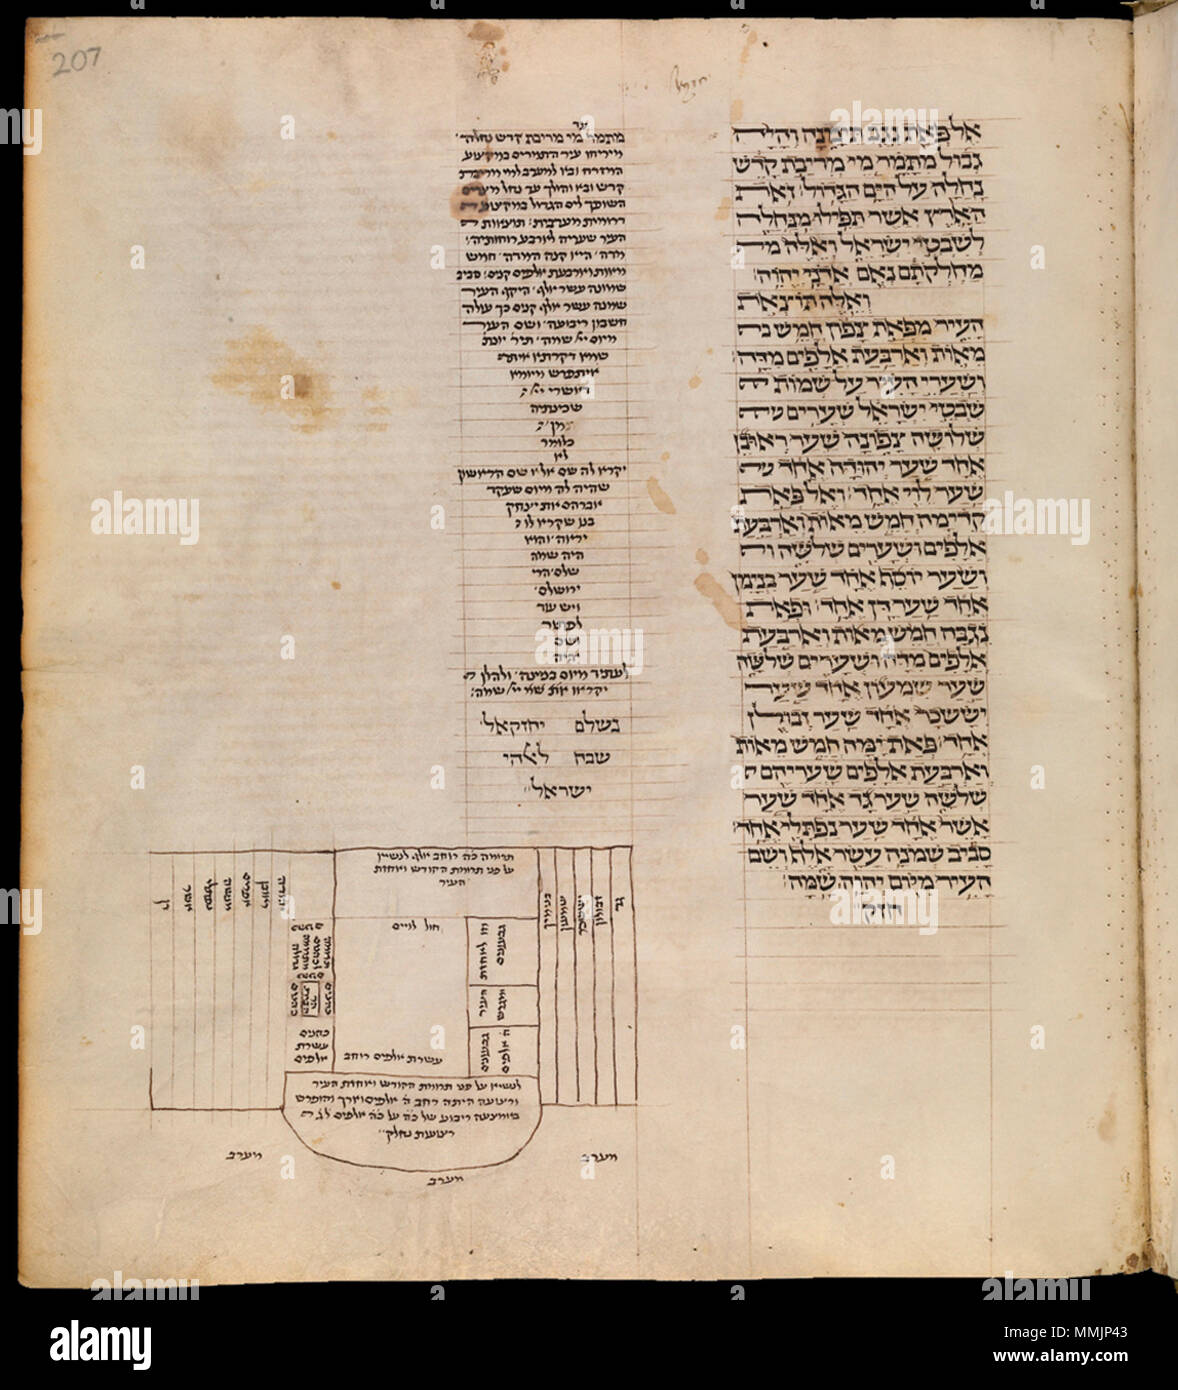 . English: The Book of the prophets, with Rashi's commentary. France?, late 13th century, 16 3/4 x 14 1/8 in. (42.5 x 35.9 cm), MS. Opp. 2, fol. 207a The French rabbi Solomon ben Isaac, known as Rashi (1040–1105), was a leading commentator on the Bible and Talmud. This copy of his exegesis of the Book of Prophets was made about two hundred years after his death. The biblical text is in large letters, with the commentary alongside it in a smaller hand. The arrangement of text in a decorative fashion is a distinctive feature of Hebrew manuscripts. The diagram illustrates Ezekiel's vision in chap Stock Photo